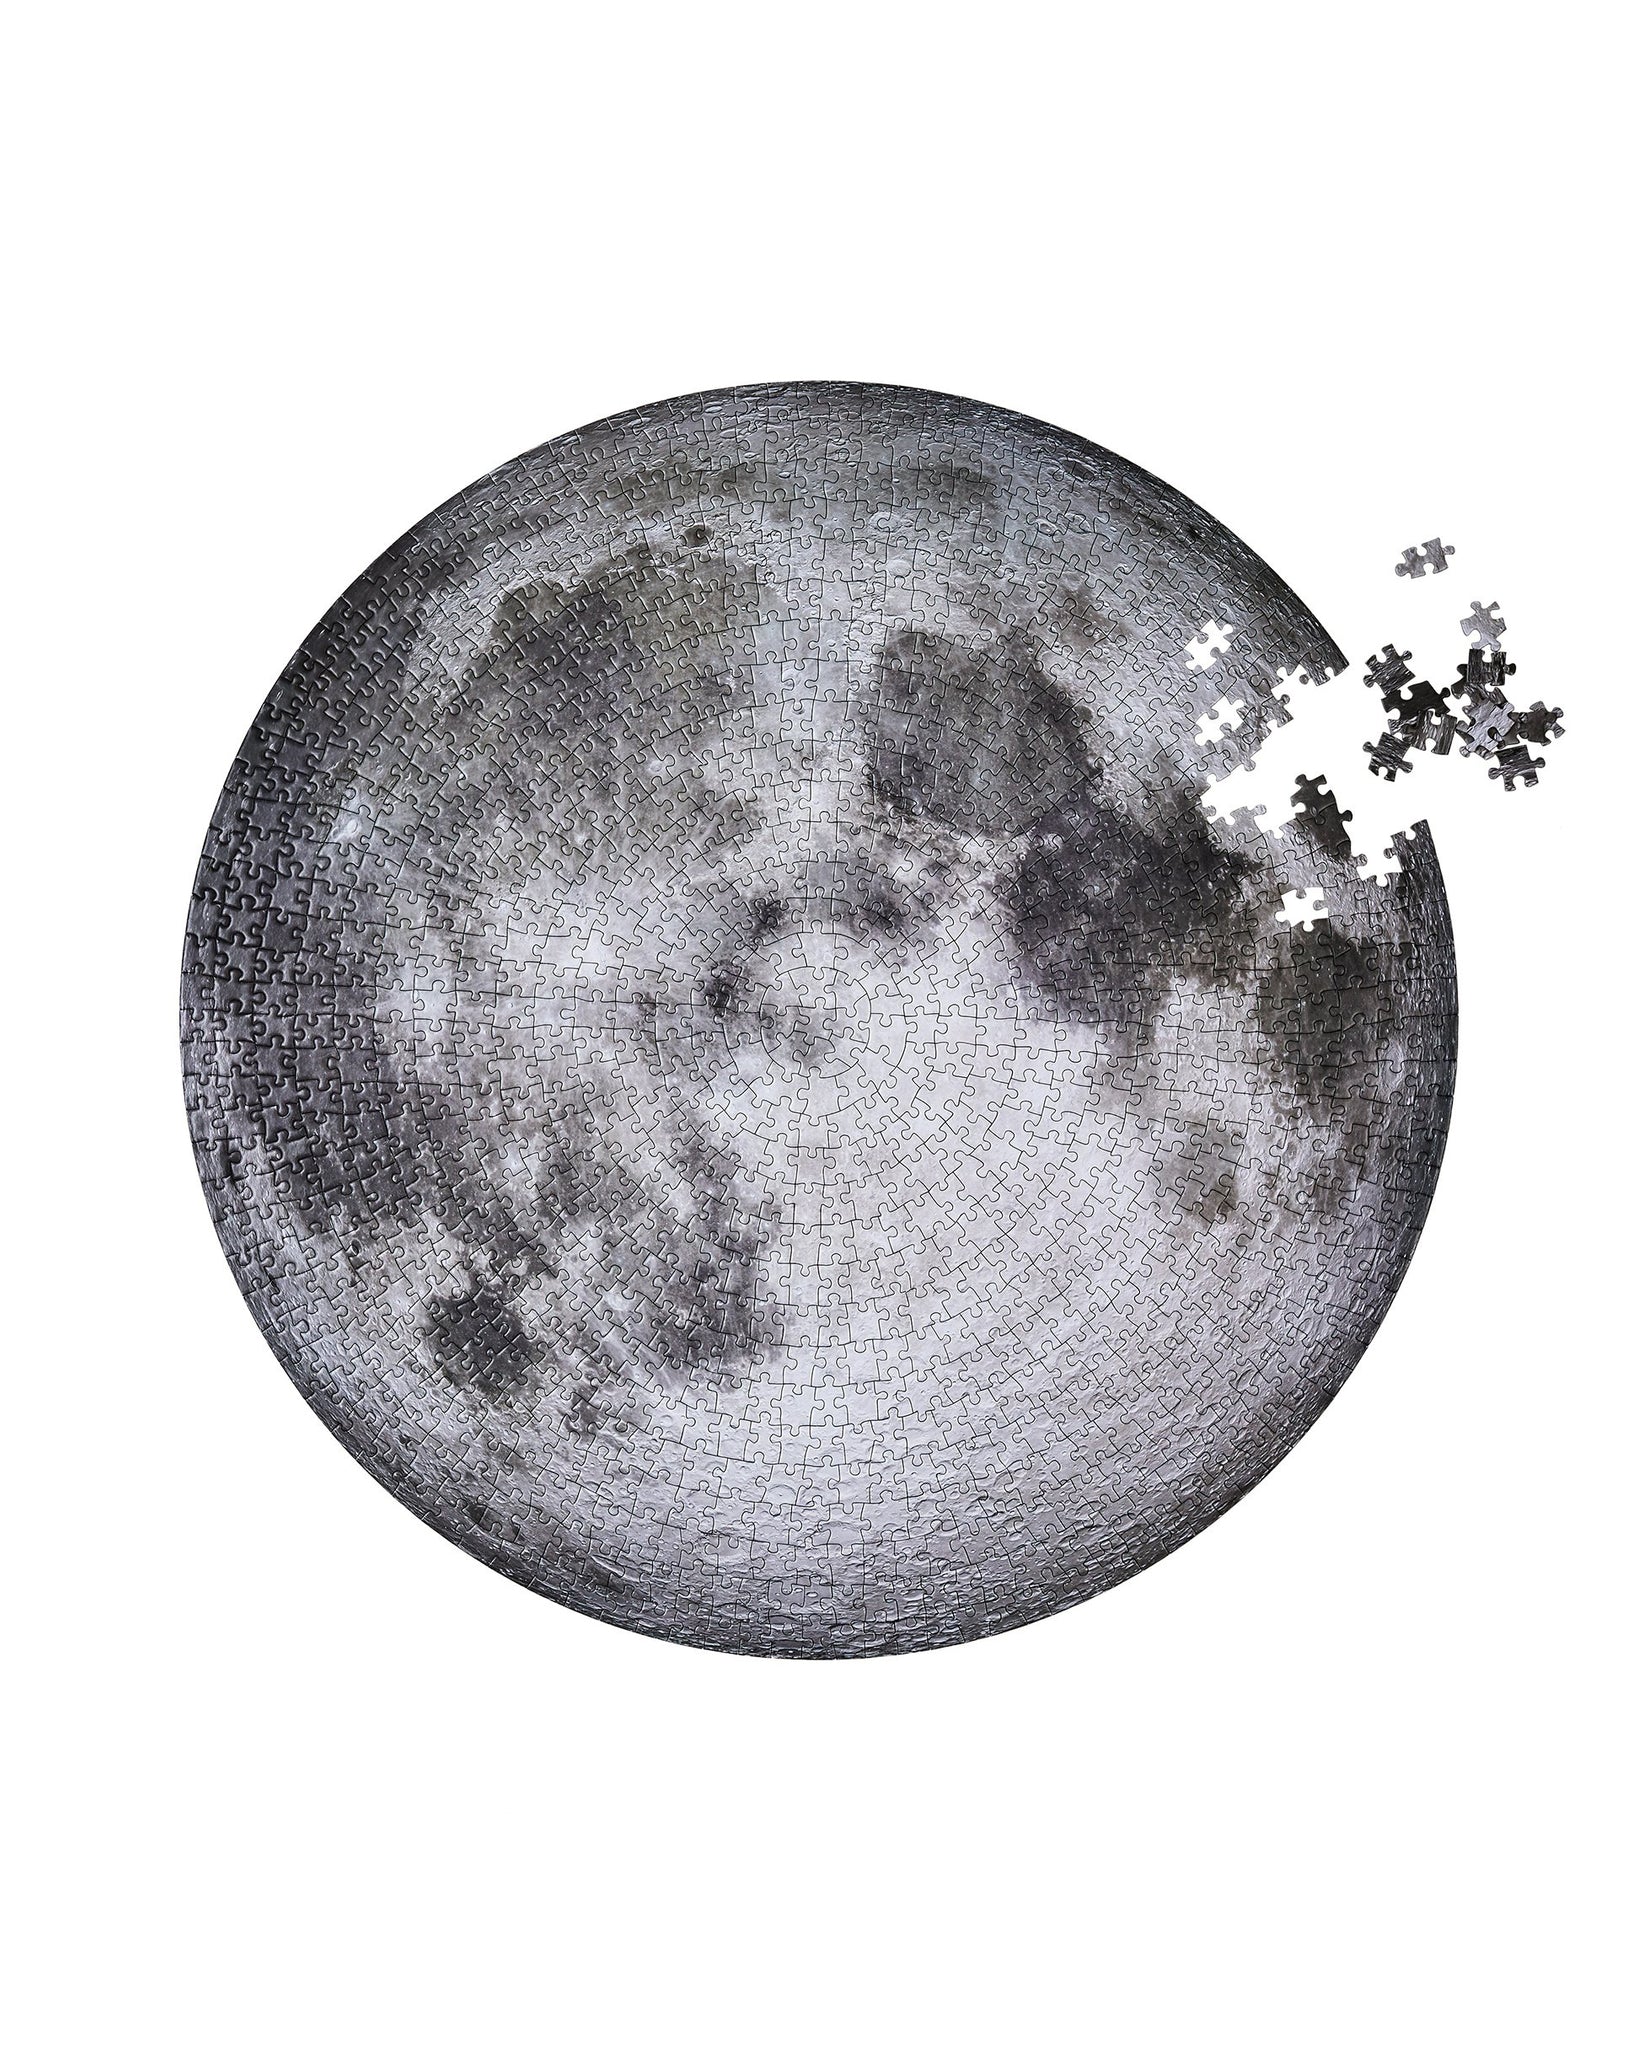 The Moon Round Puzzle by Four Point Puzzles